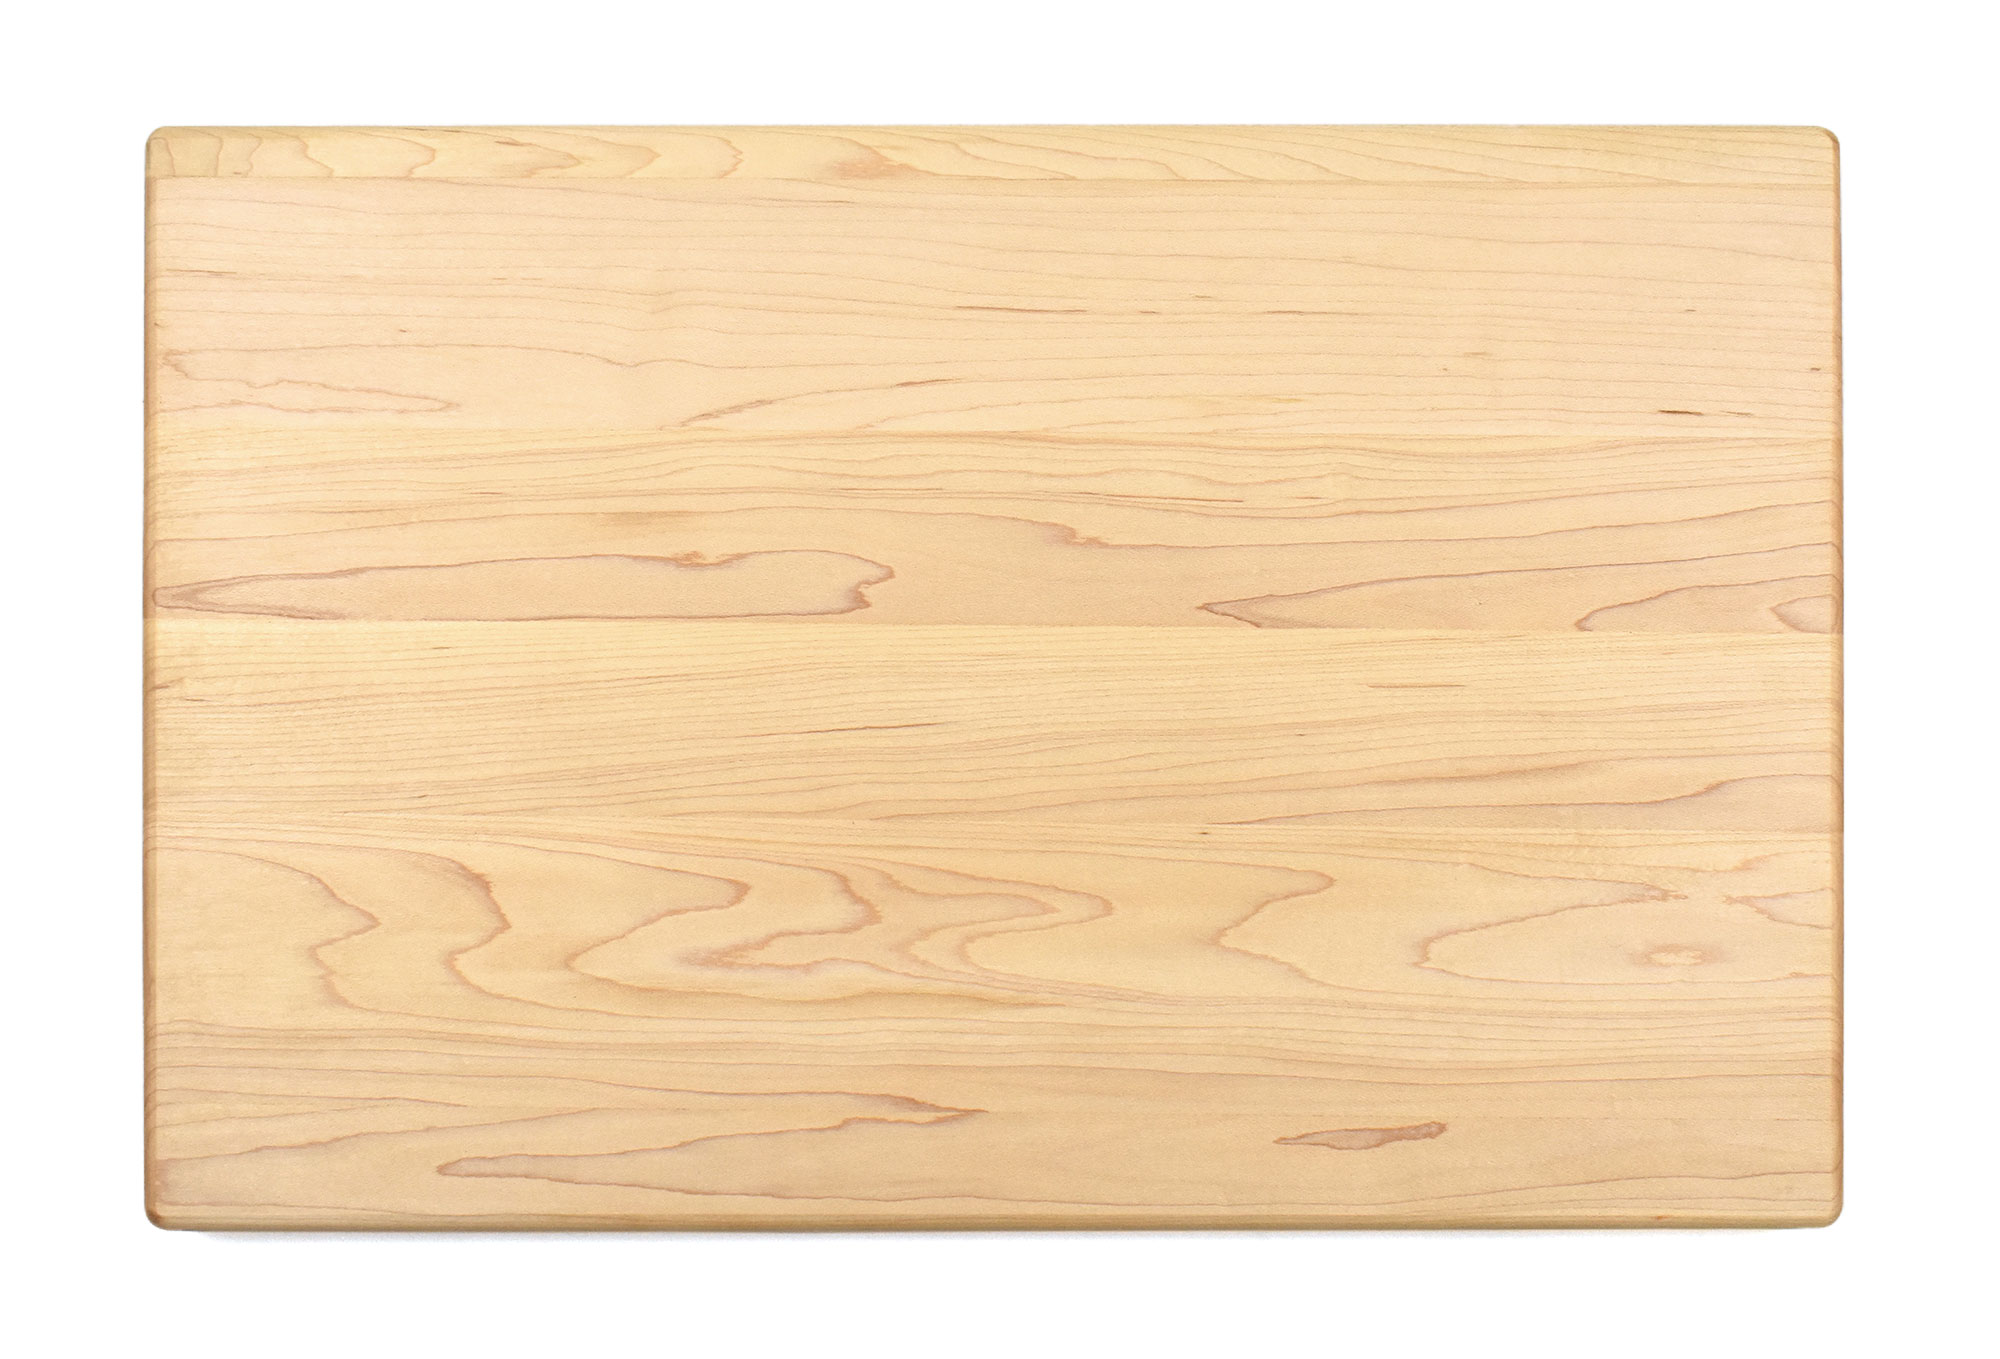 Butcher Block 1 Inch Thick